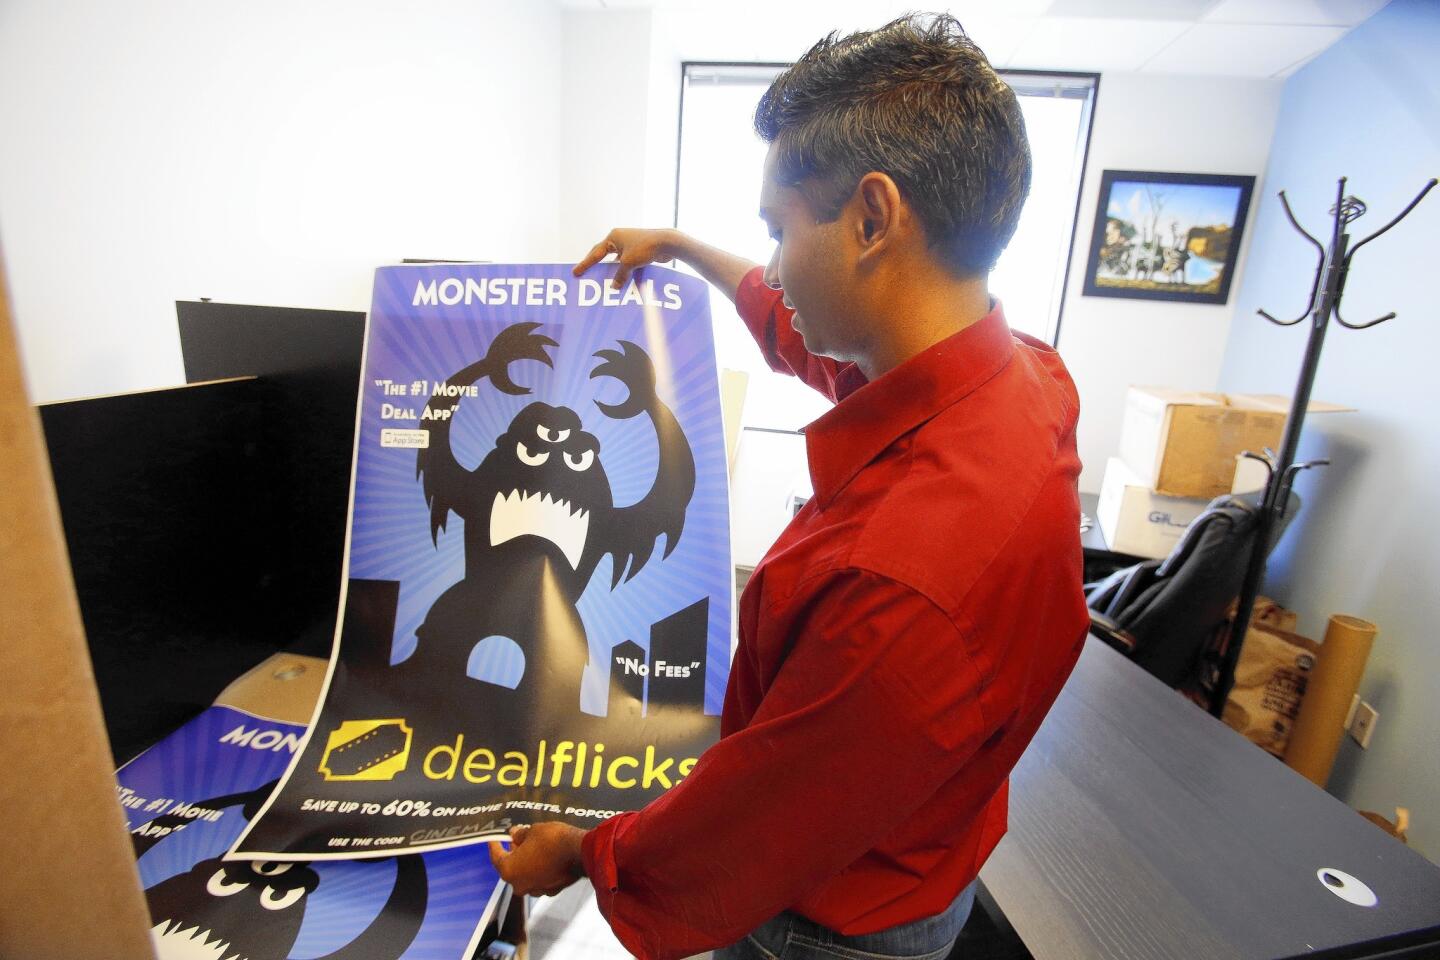 Dealflicks aims to put movie fans in cheaper seats